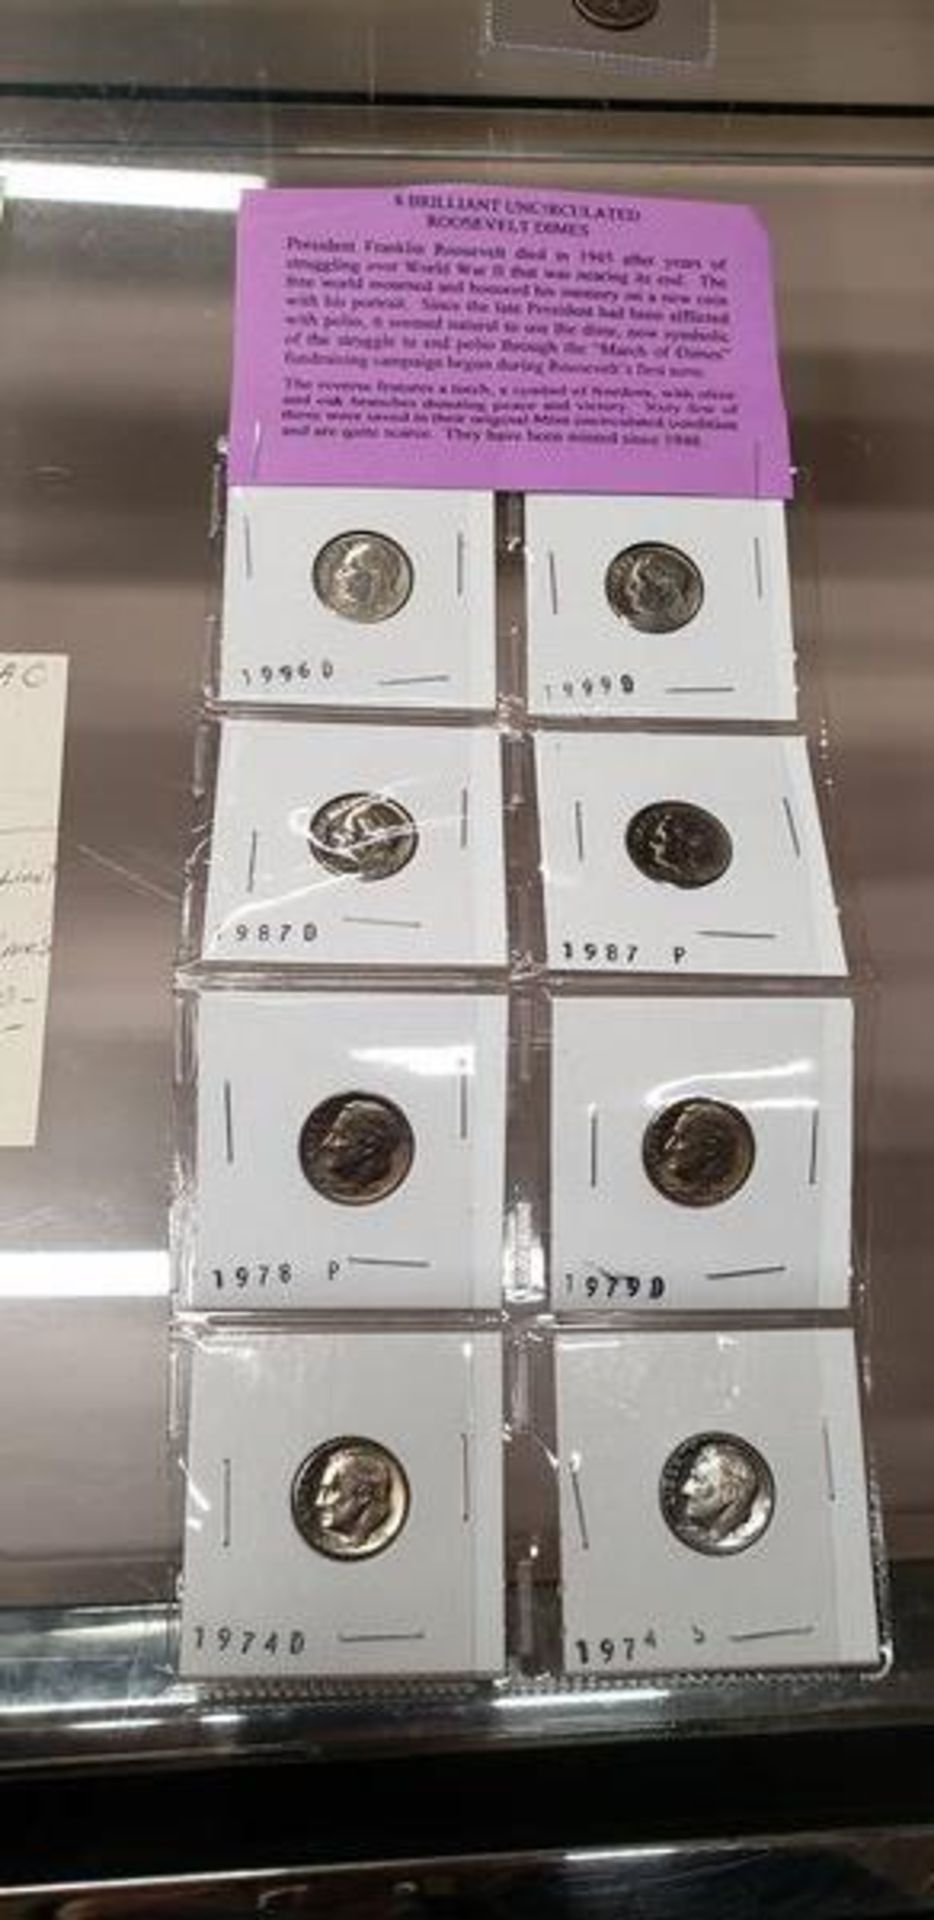 LOT OF 8 BRILLIANT UNCIRCULATED ROOSEVELT DIMES 1974 D AND S, 1978P, 1979D, 1987 D AND P, 1996D AND